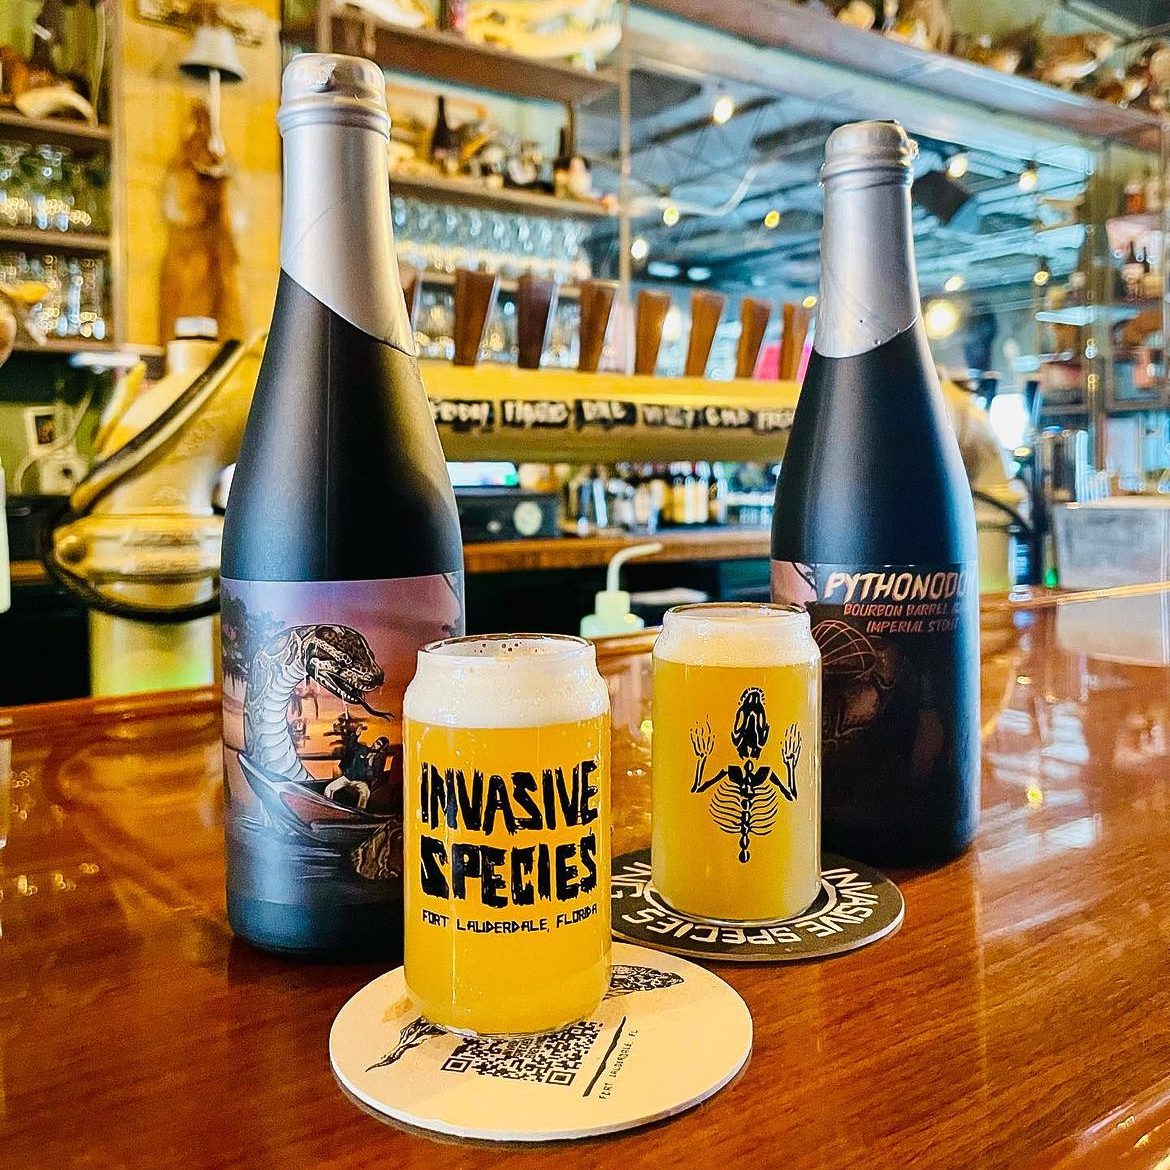 Have you heard of Invasive Species Brewing? Invasive Species has a whopping 458 beers listed on Untappd! And with 65K check-ins, this Floridian staple maintains a massive overall rating of 4.06! During the Untappd Community Awards, the crew secured 6 golds and 2 silver medals!